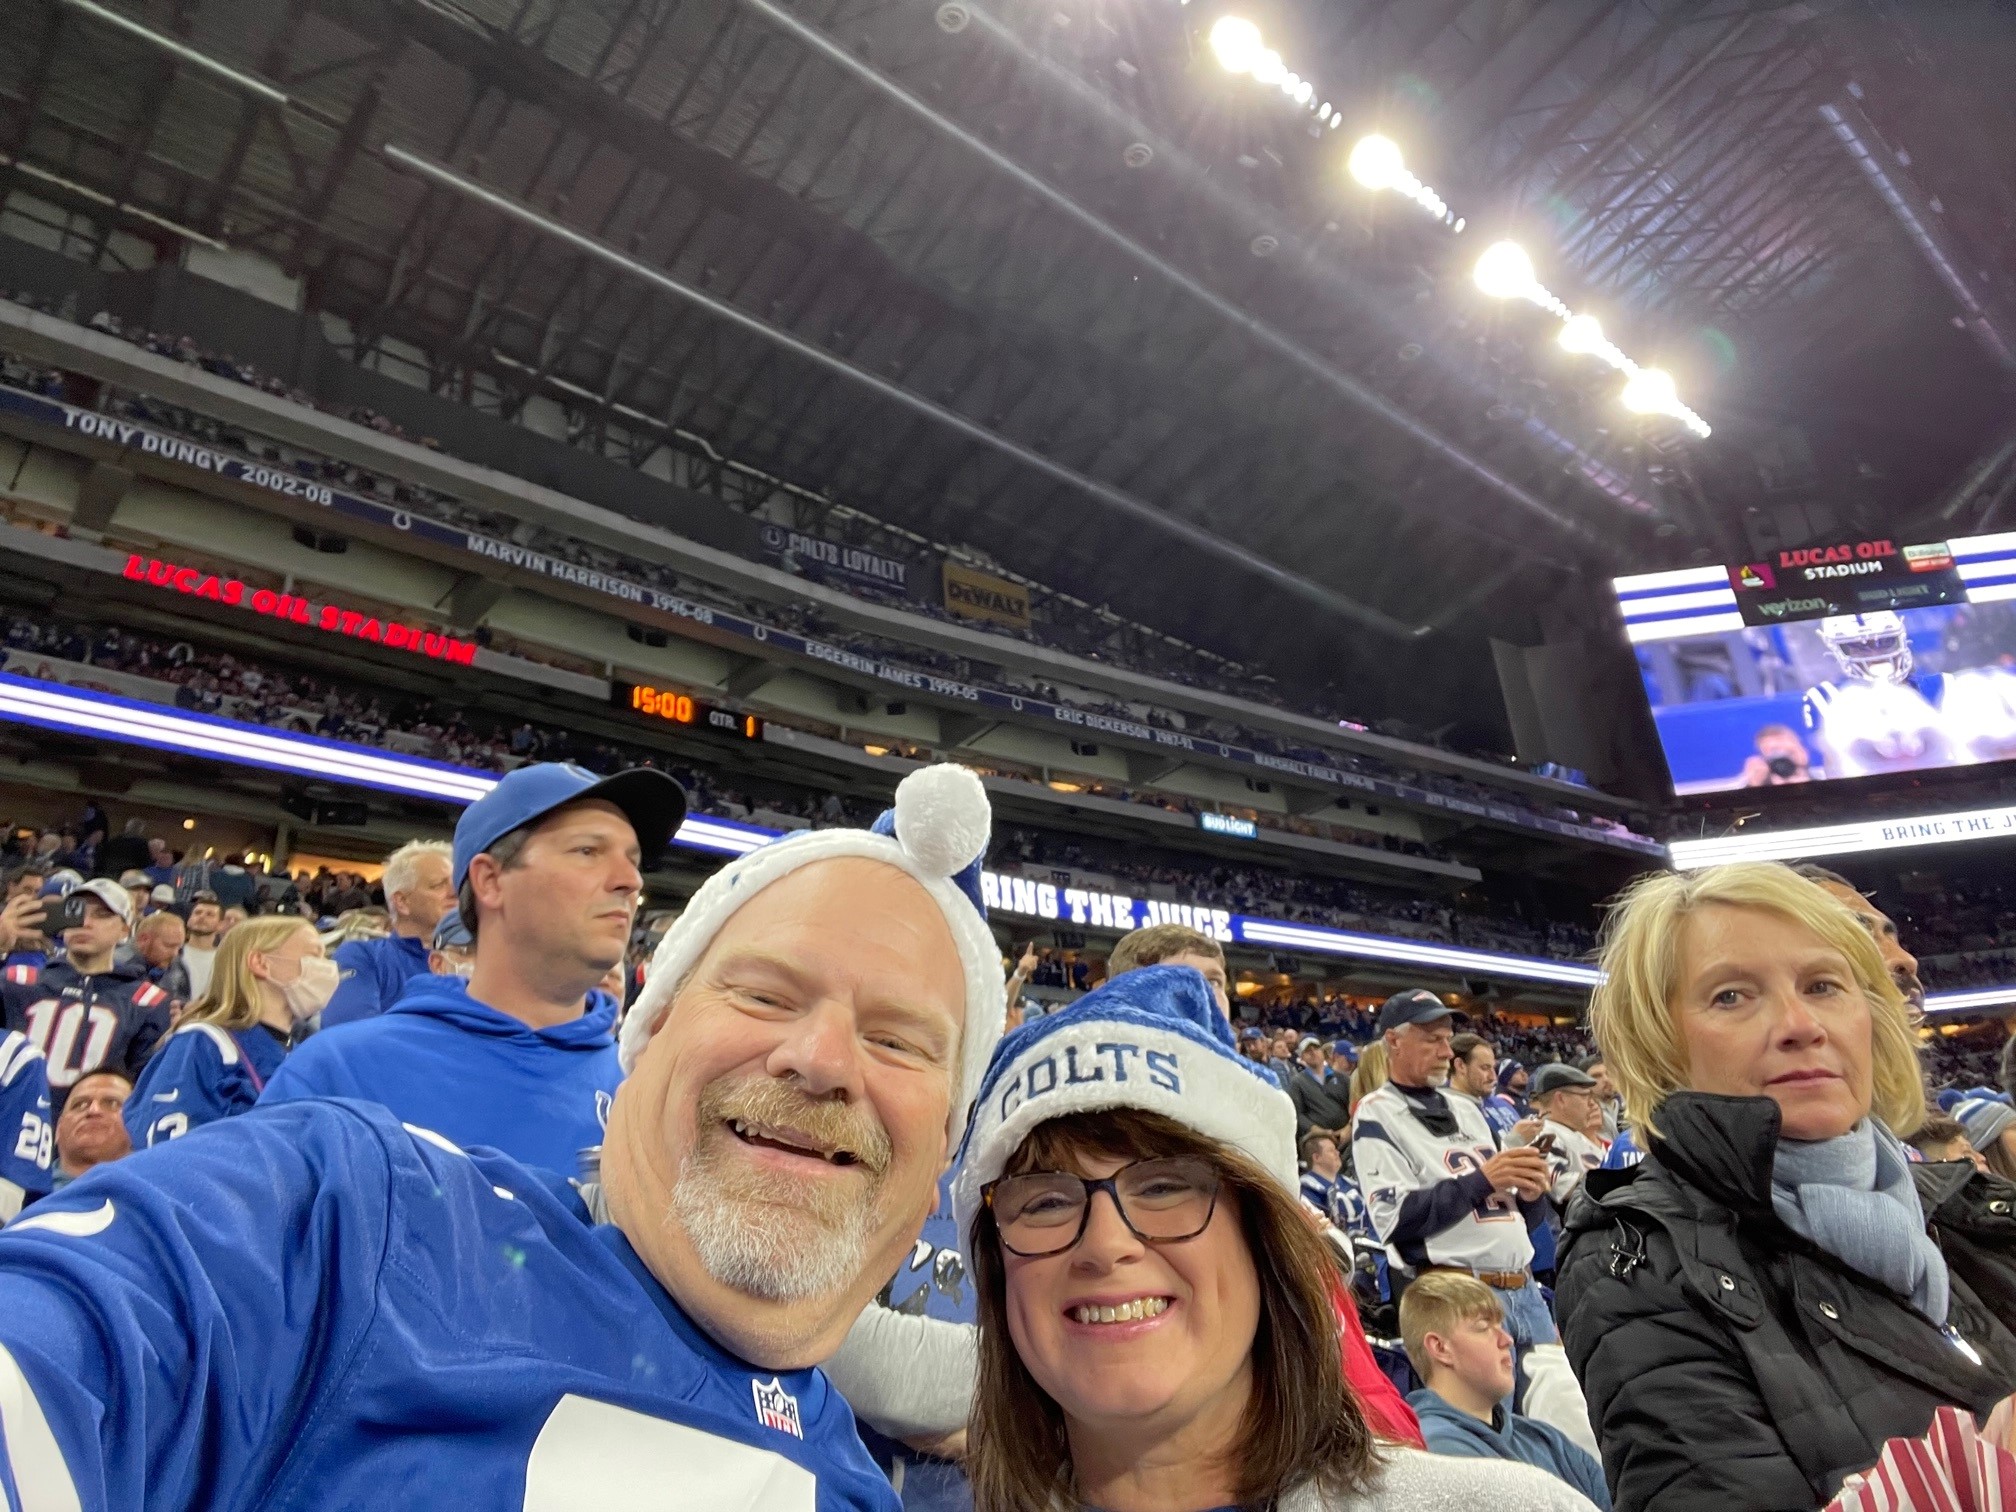 Steve and Jude at COLTs game